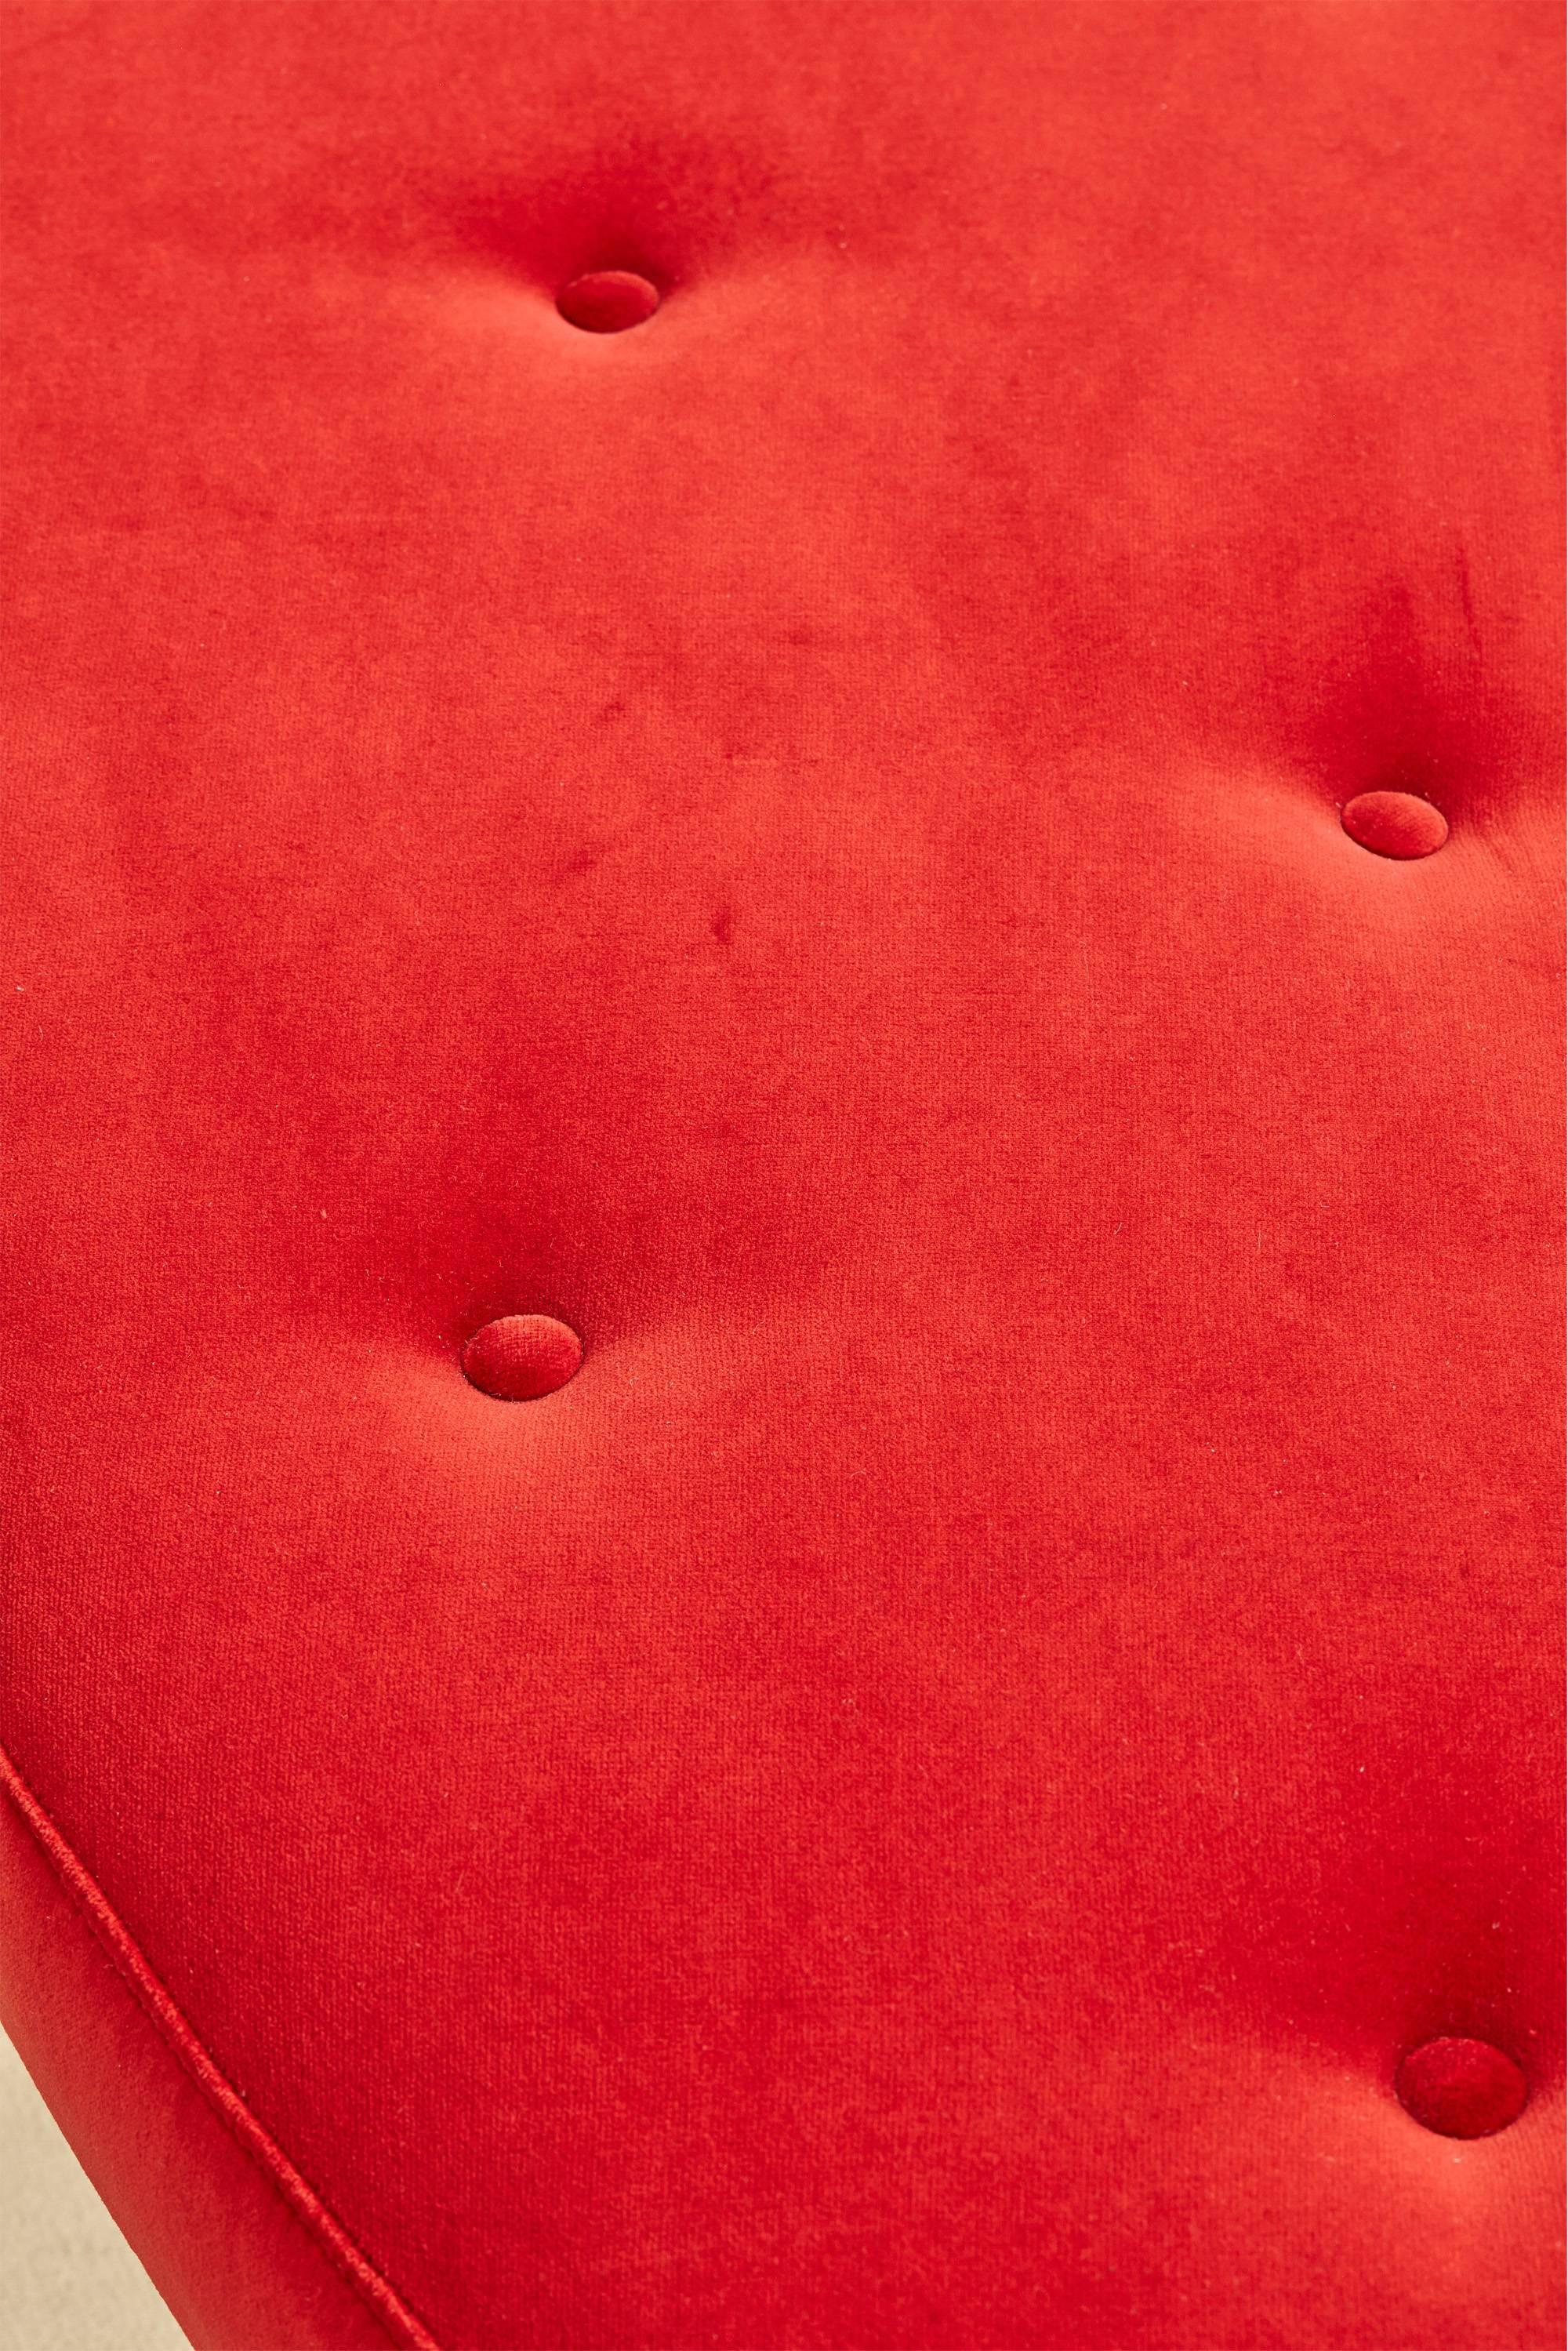 Three-Seat Red Velvet Bench by Jeannot Cerutti for Sawaya & Moroni, 1991 For Sale 2